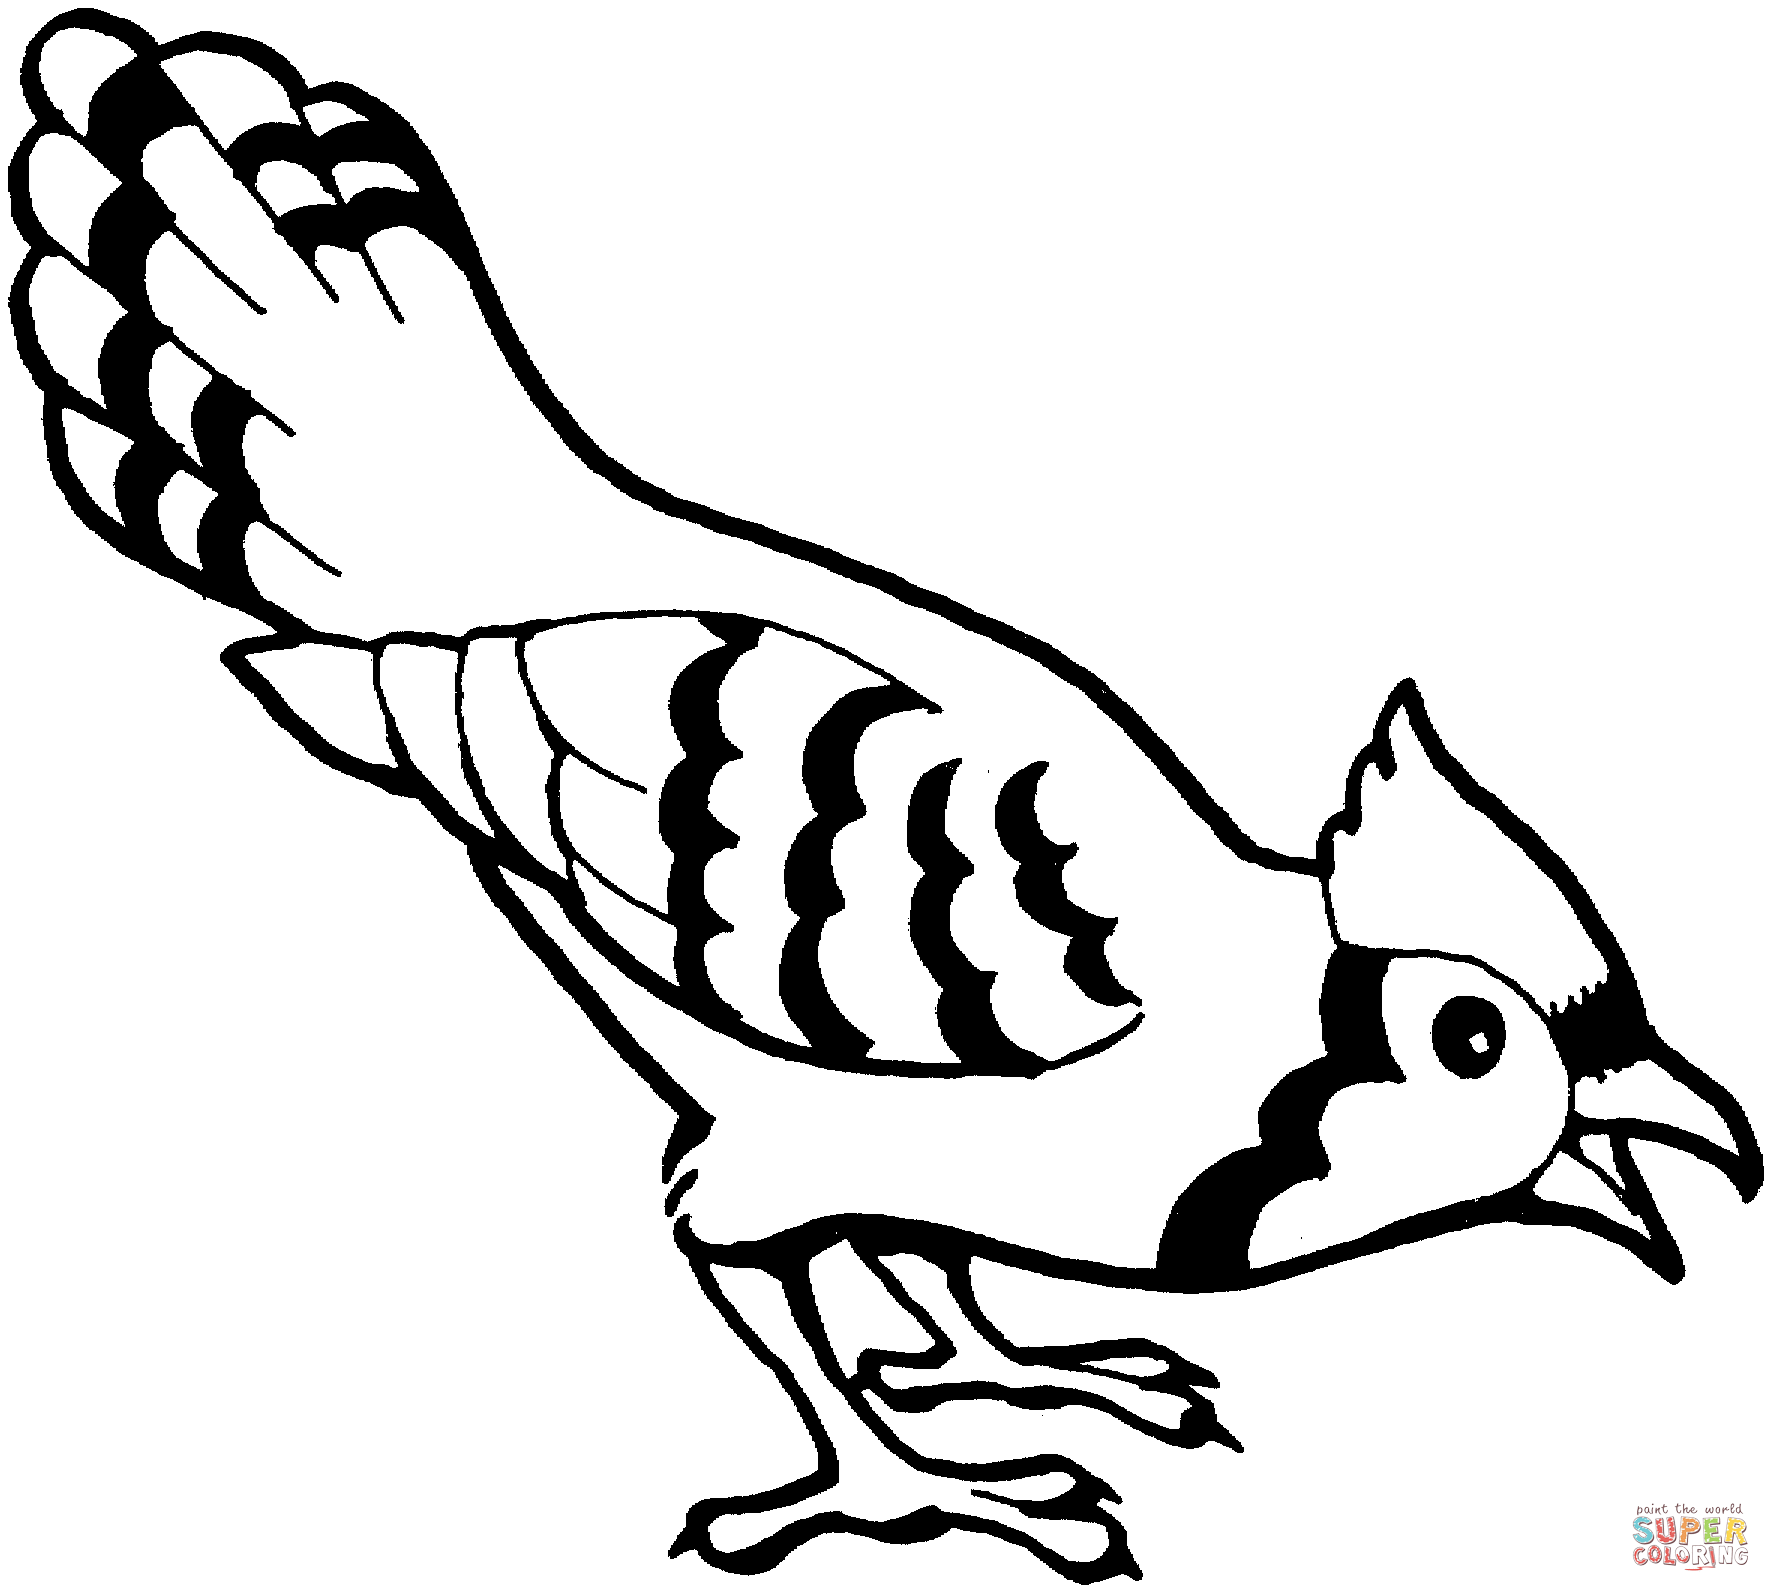 coloring ~ Blue Jay Bird Coloring Page Free Printable Pages.